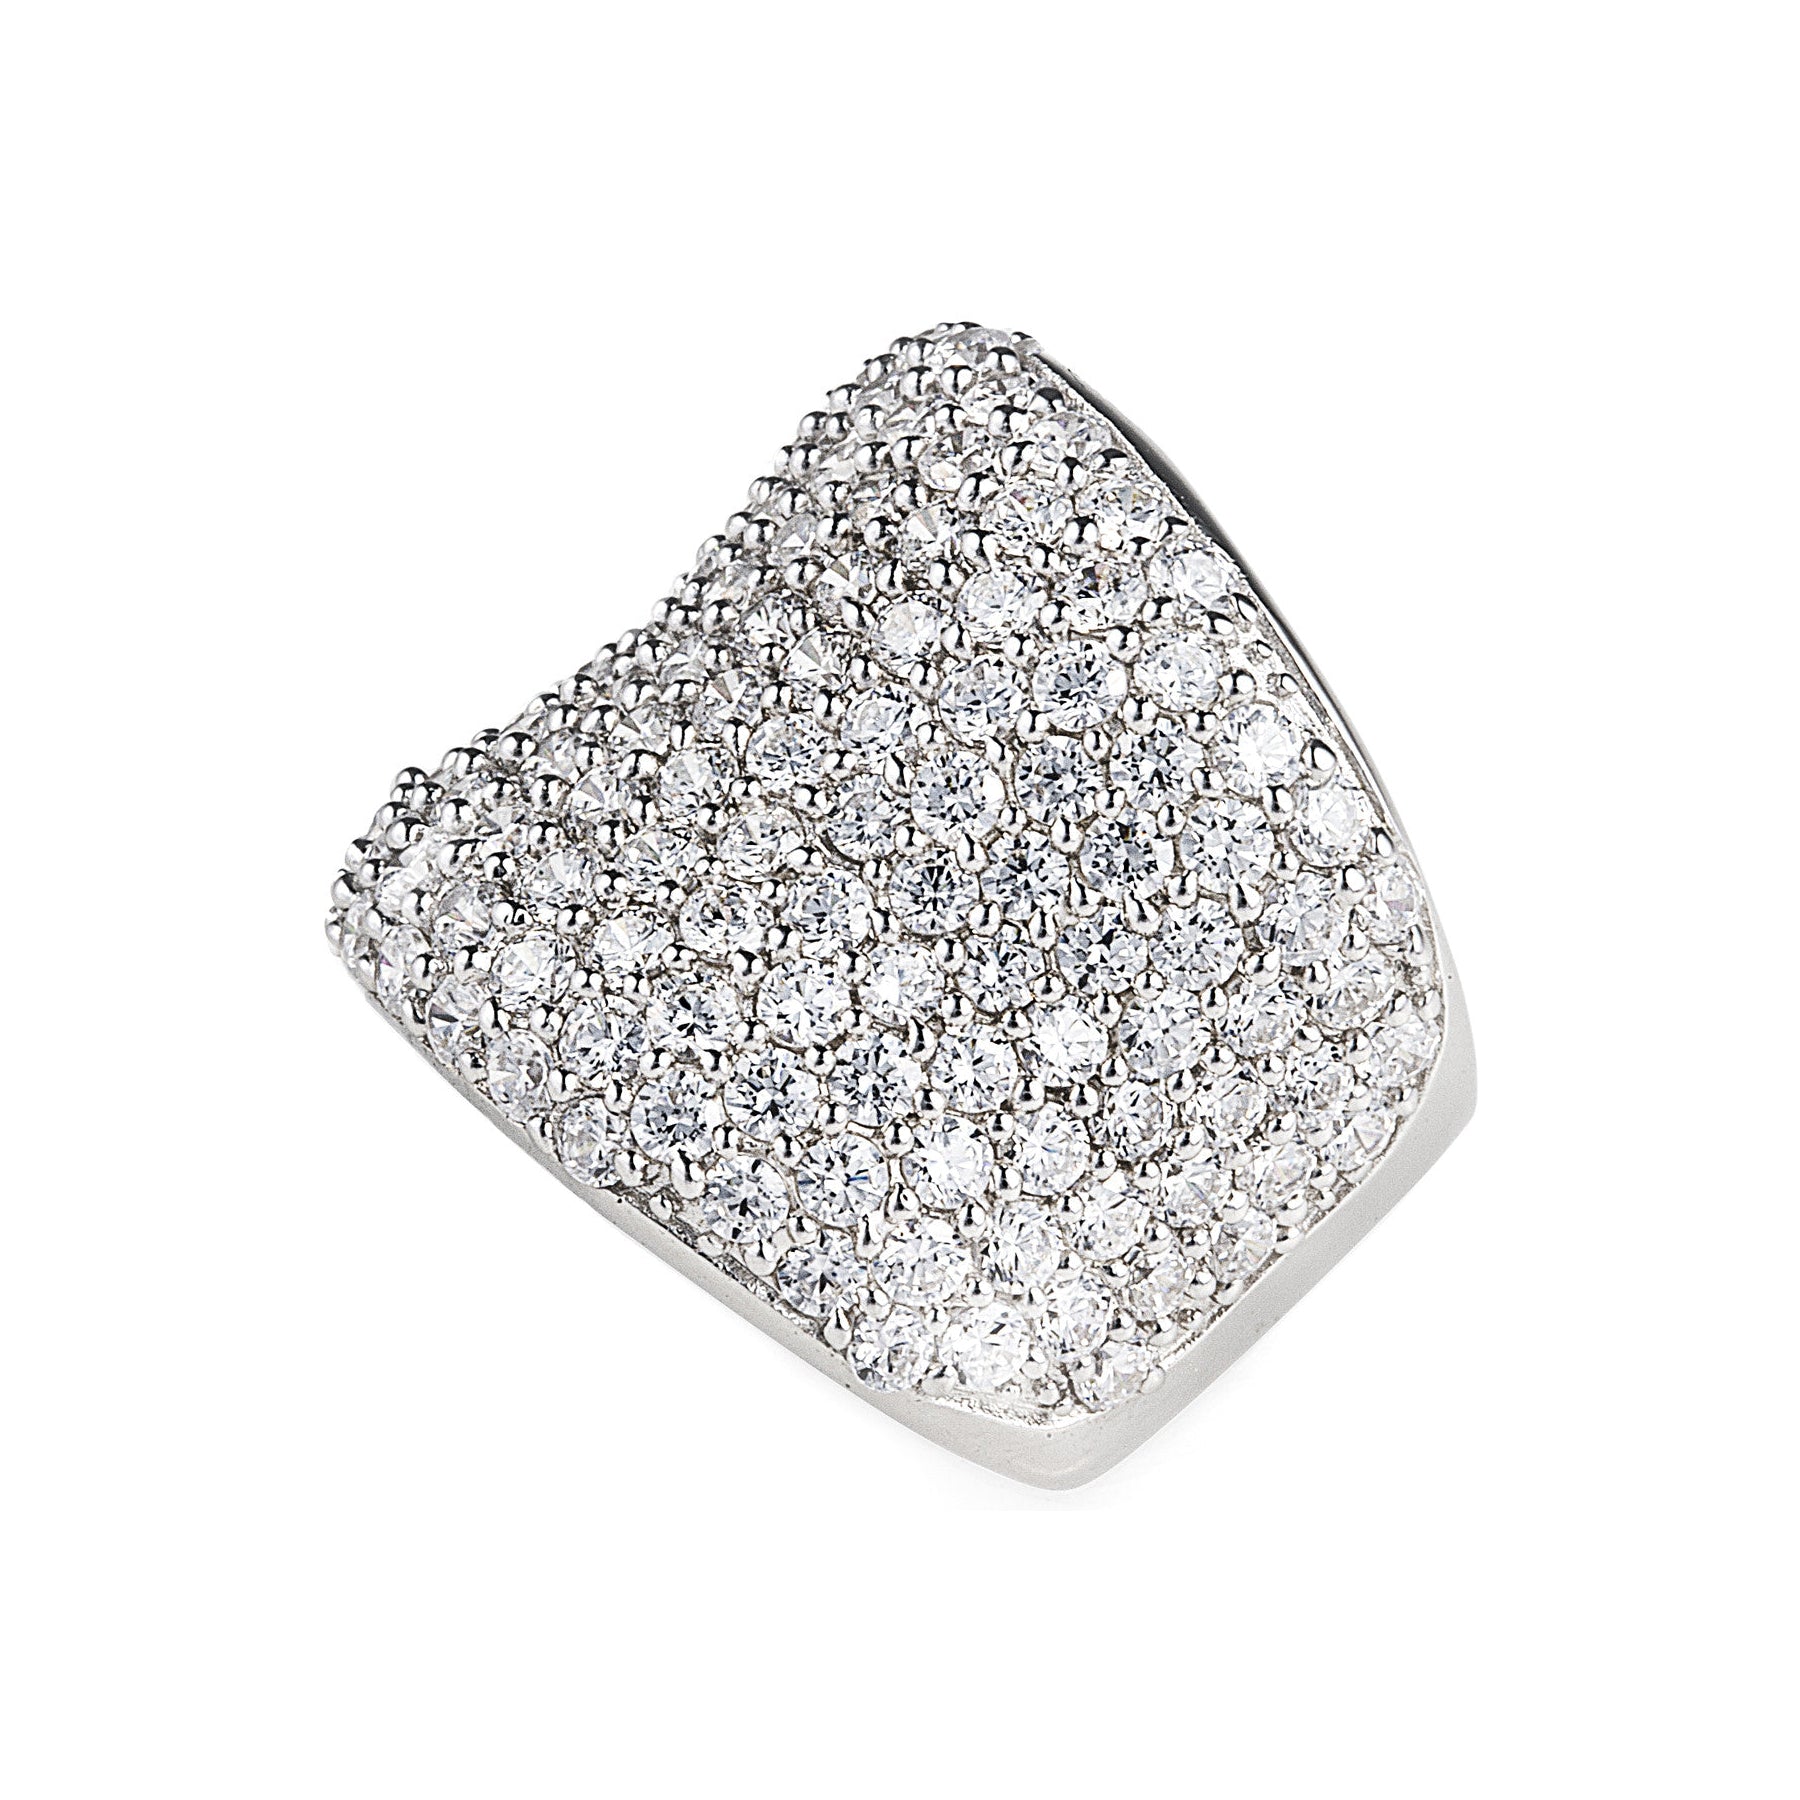 Montecarlo Ring made of 925 sterling silver with cubic zirconia stones in a pavé setting. A real show-stopper! Shop rings & affordable luxury jewellery by Bellagio & Co. Worldwide shipping